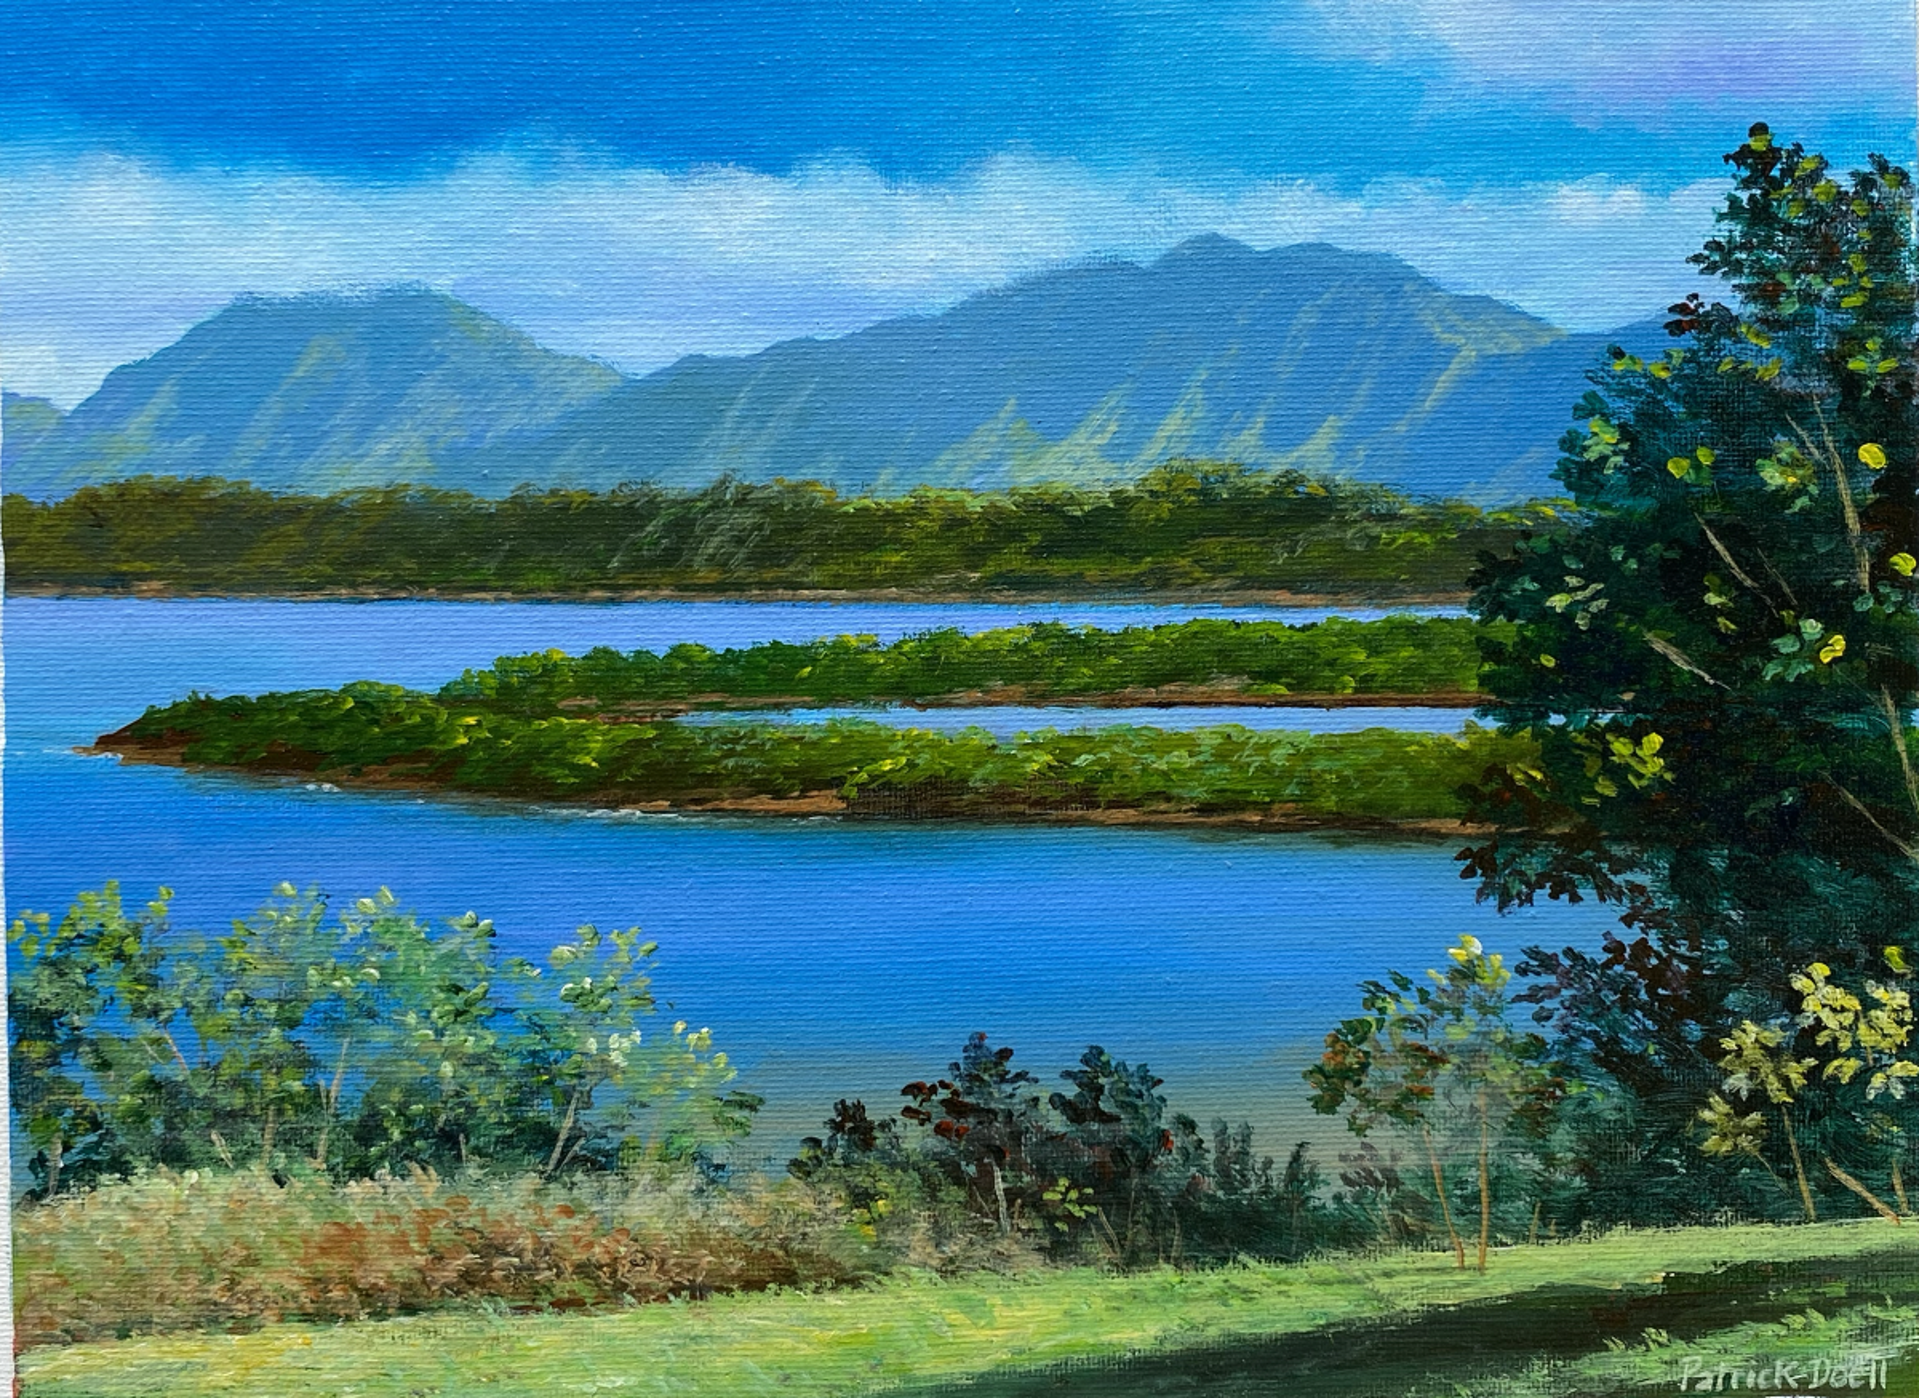 Heʻeia Fishpond by Patrick Doell